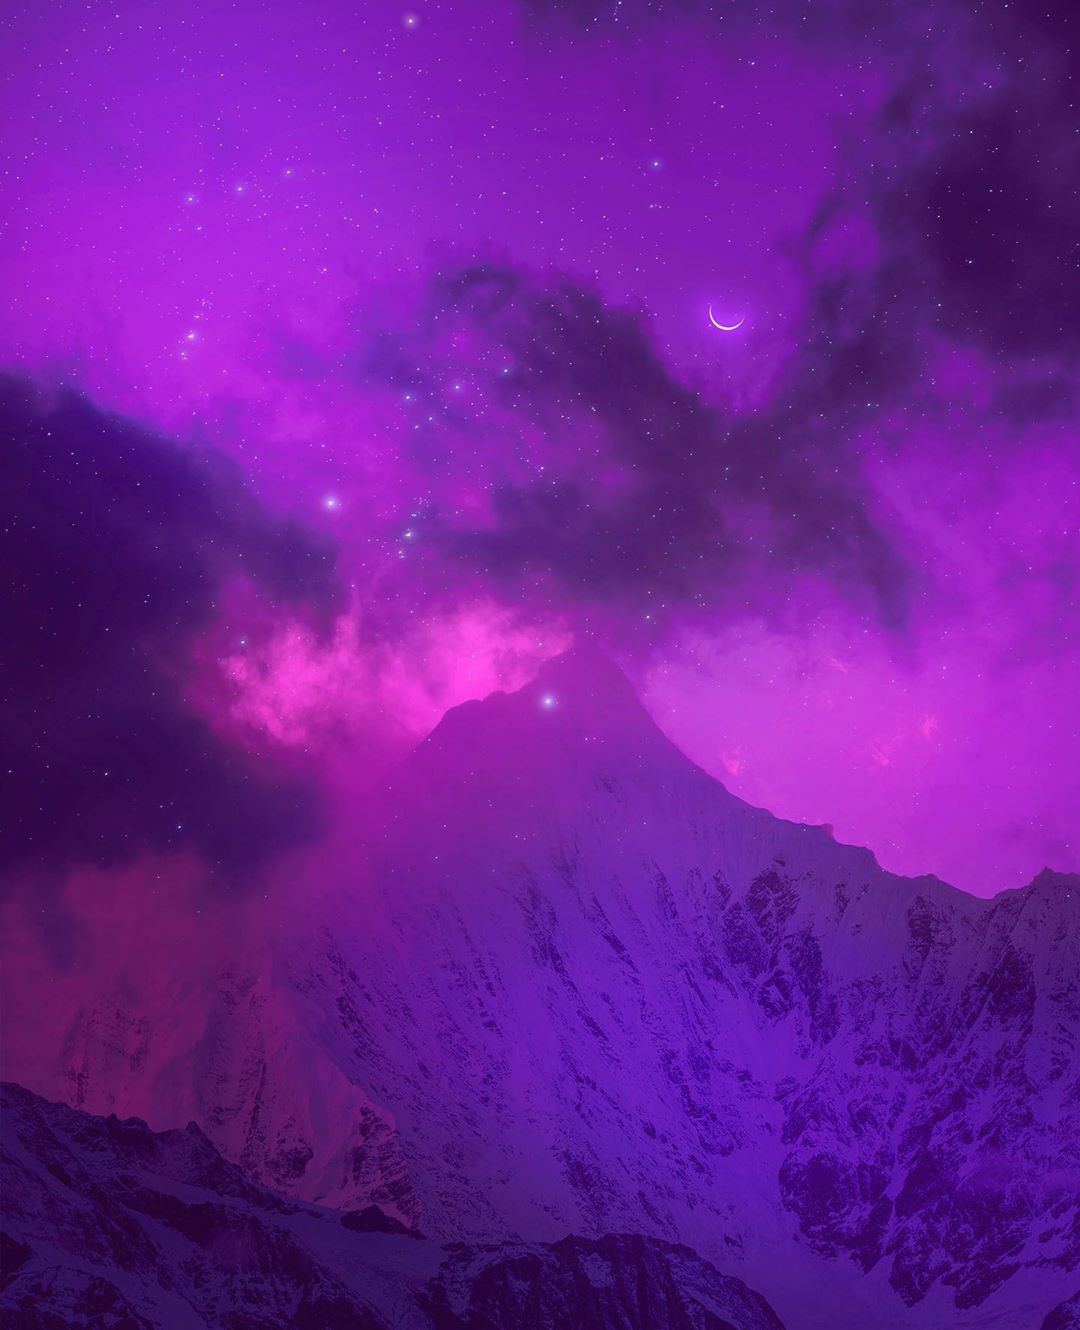 A purple sky with stars and a crescent moon above a snow covered mountain - Indigo